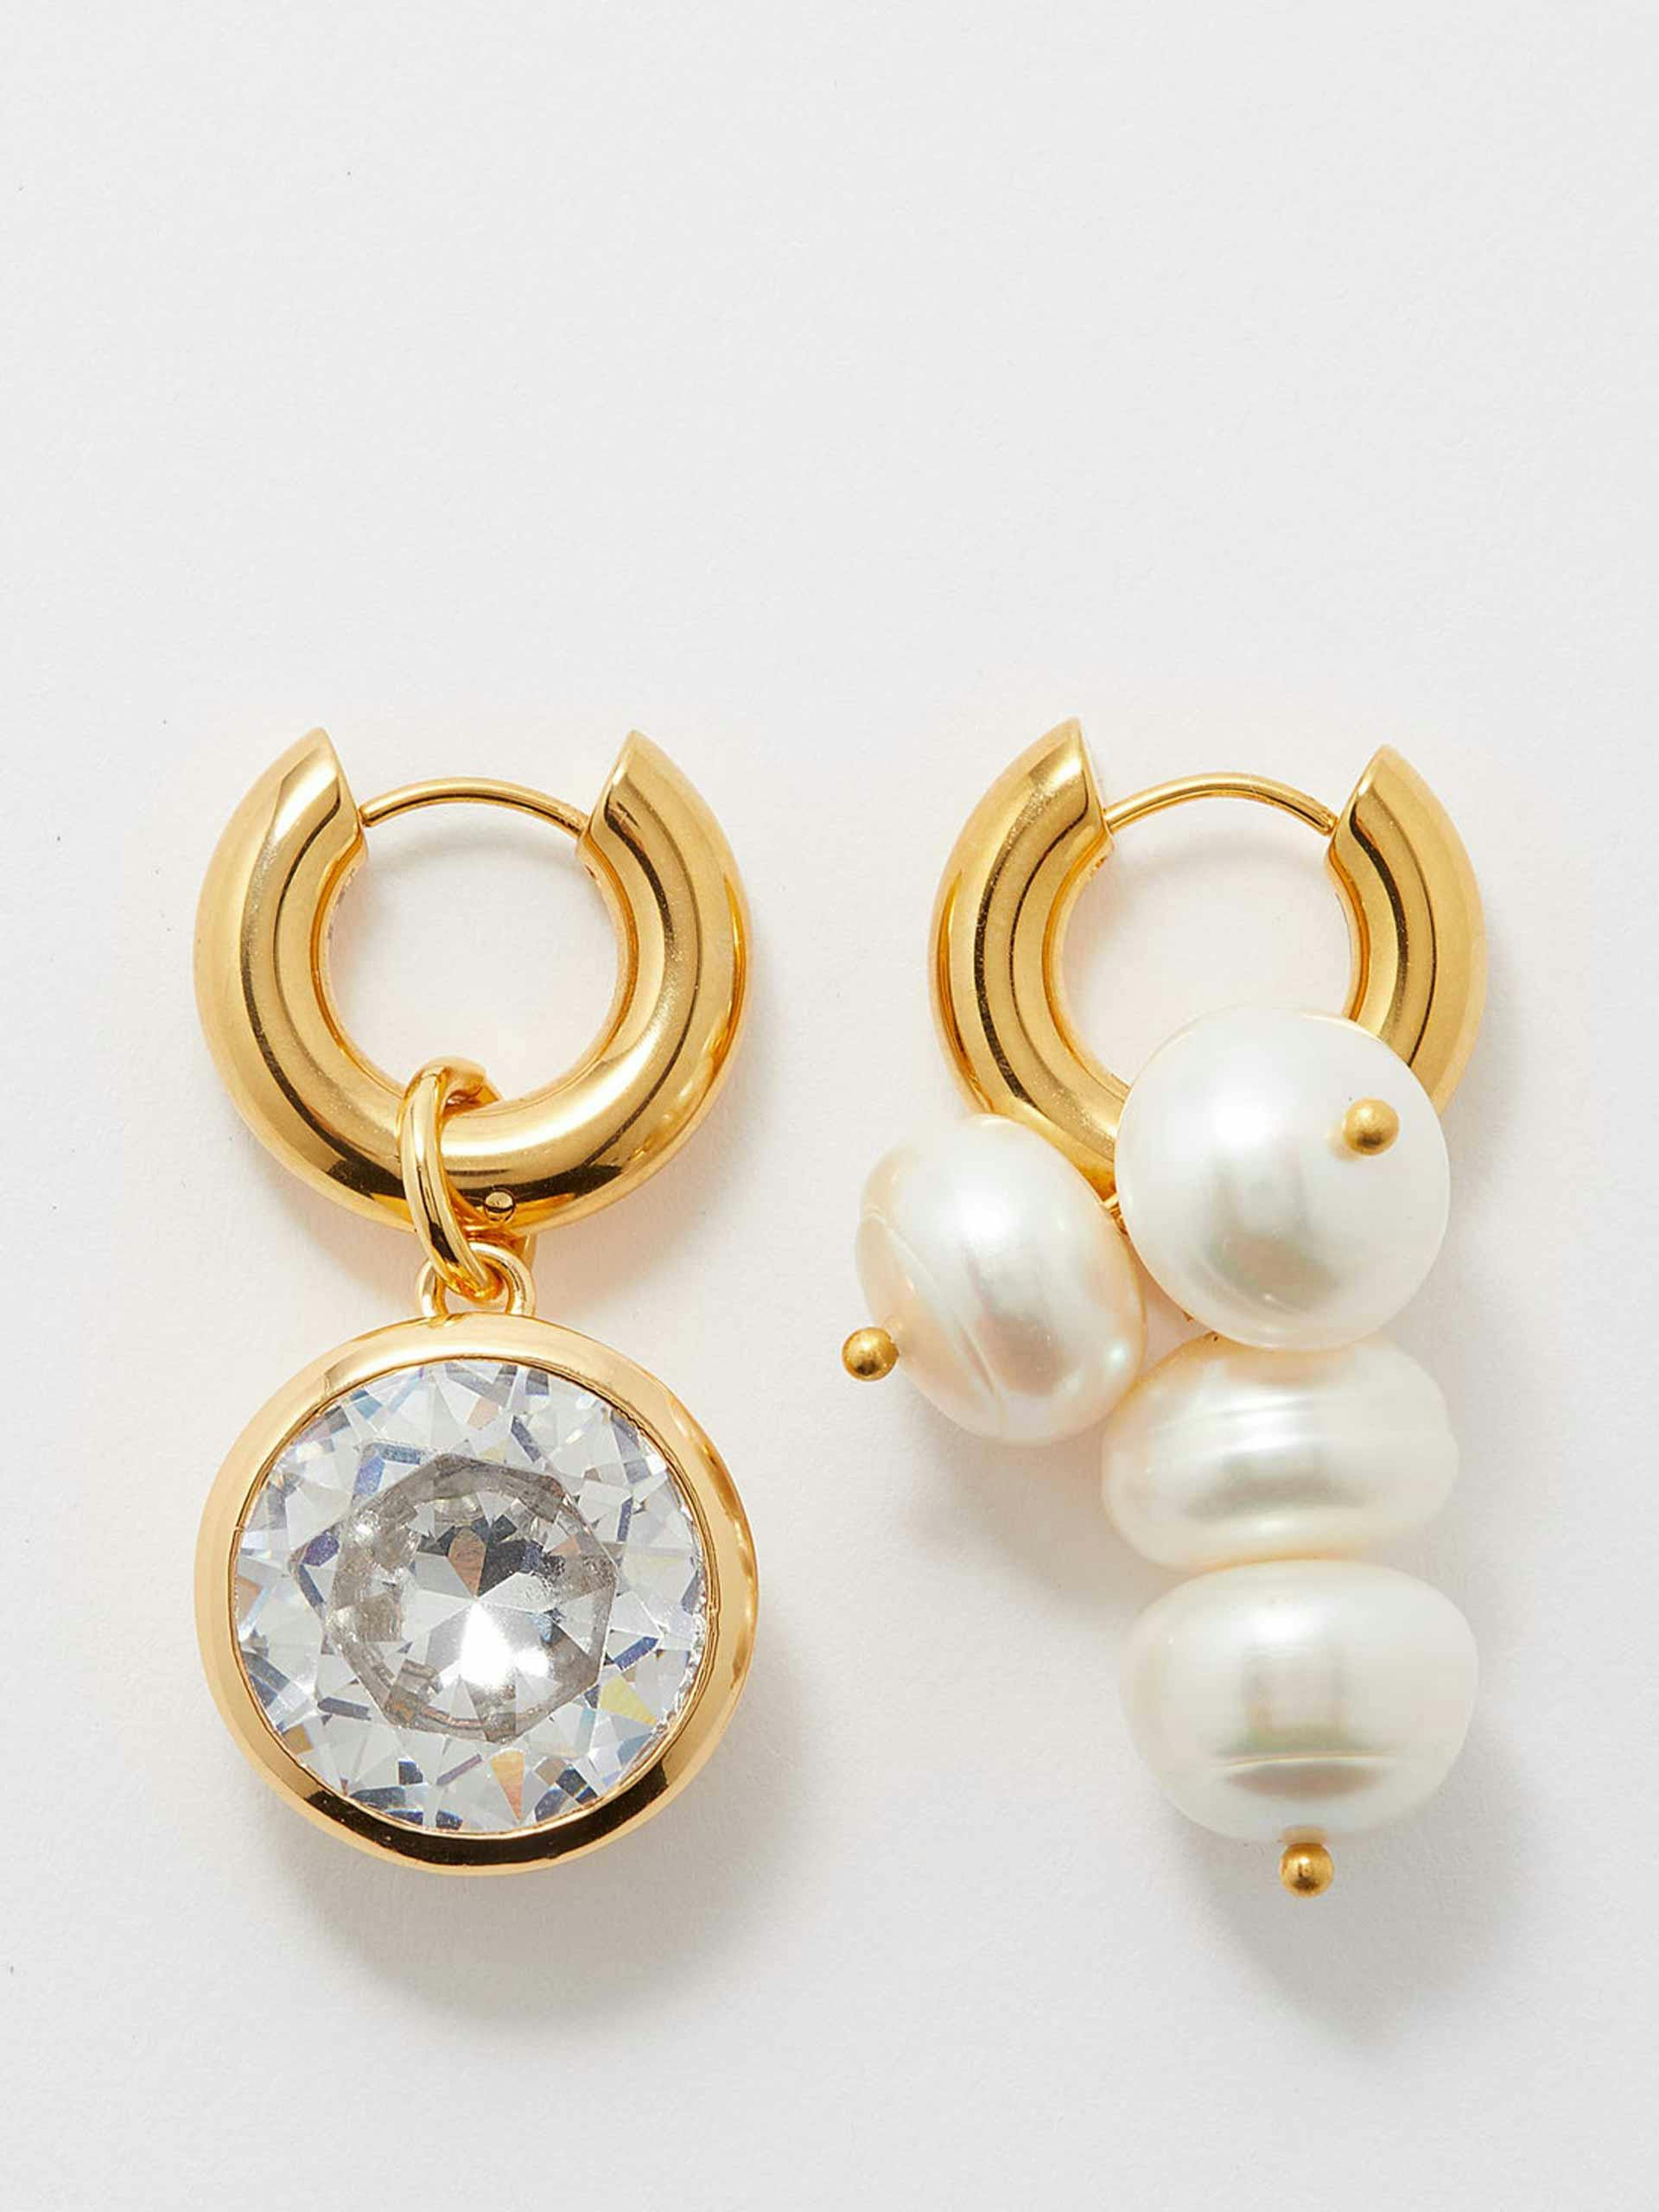 Gold and pearl mismatched earrings